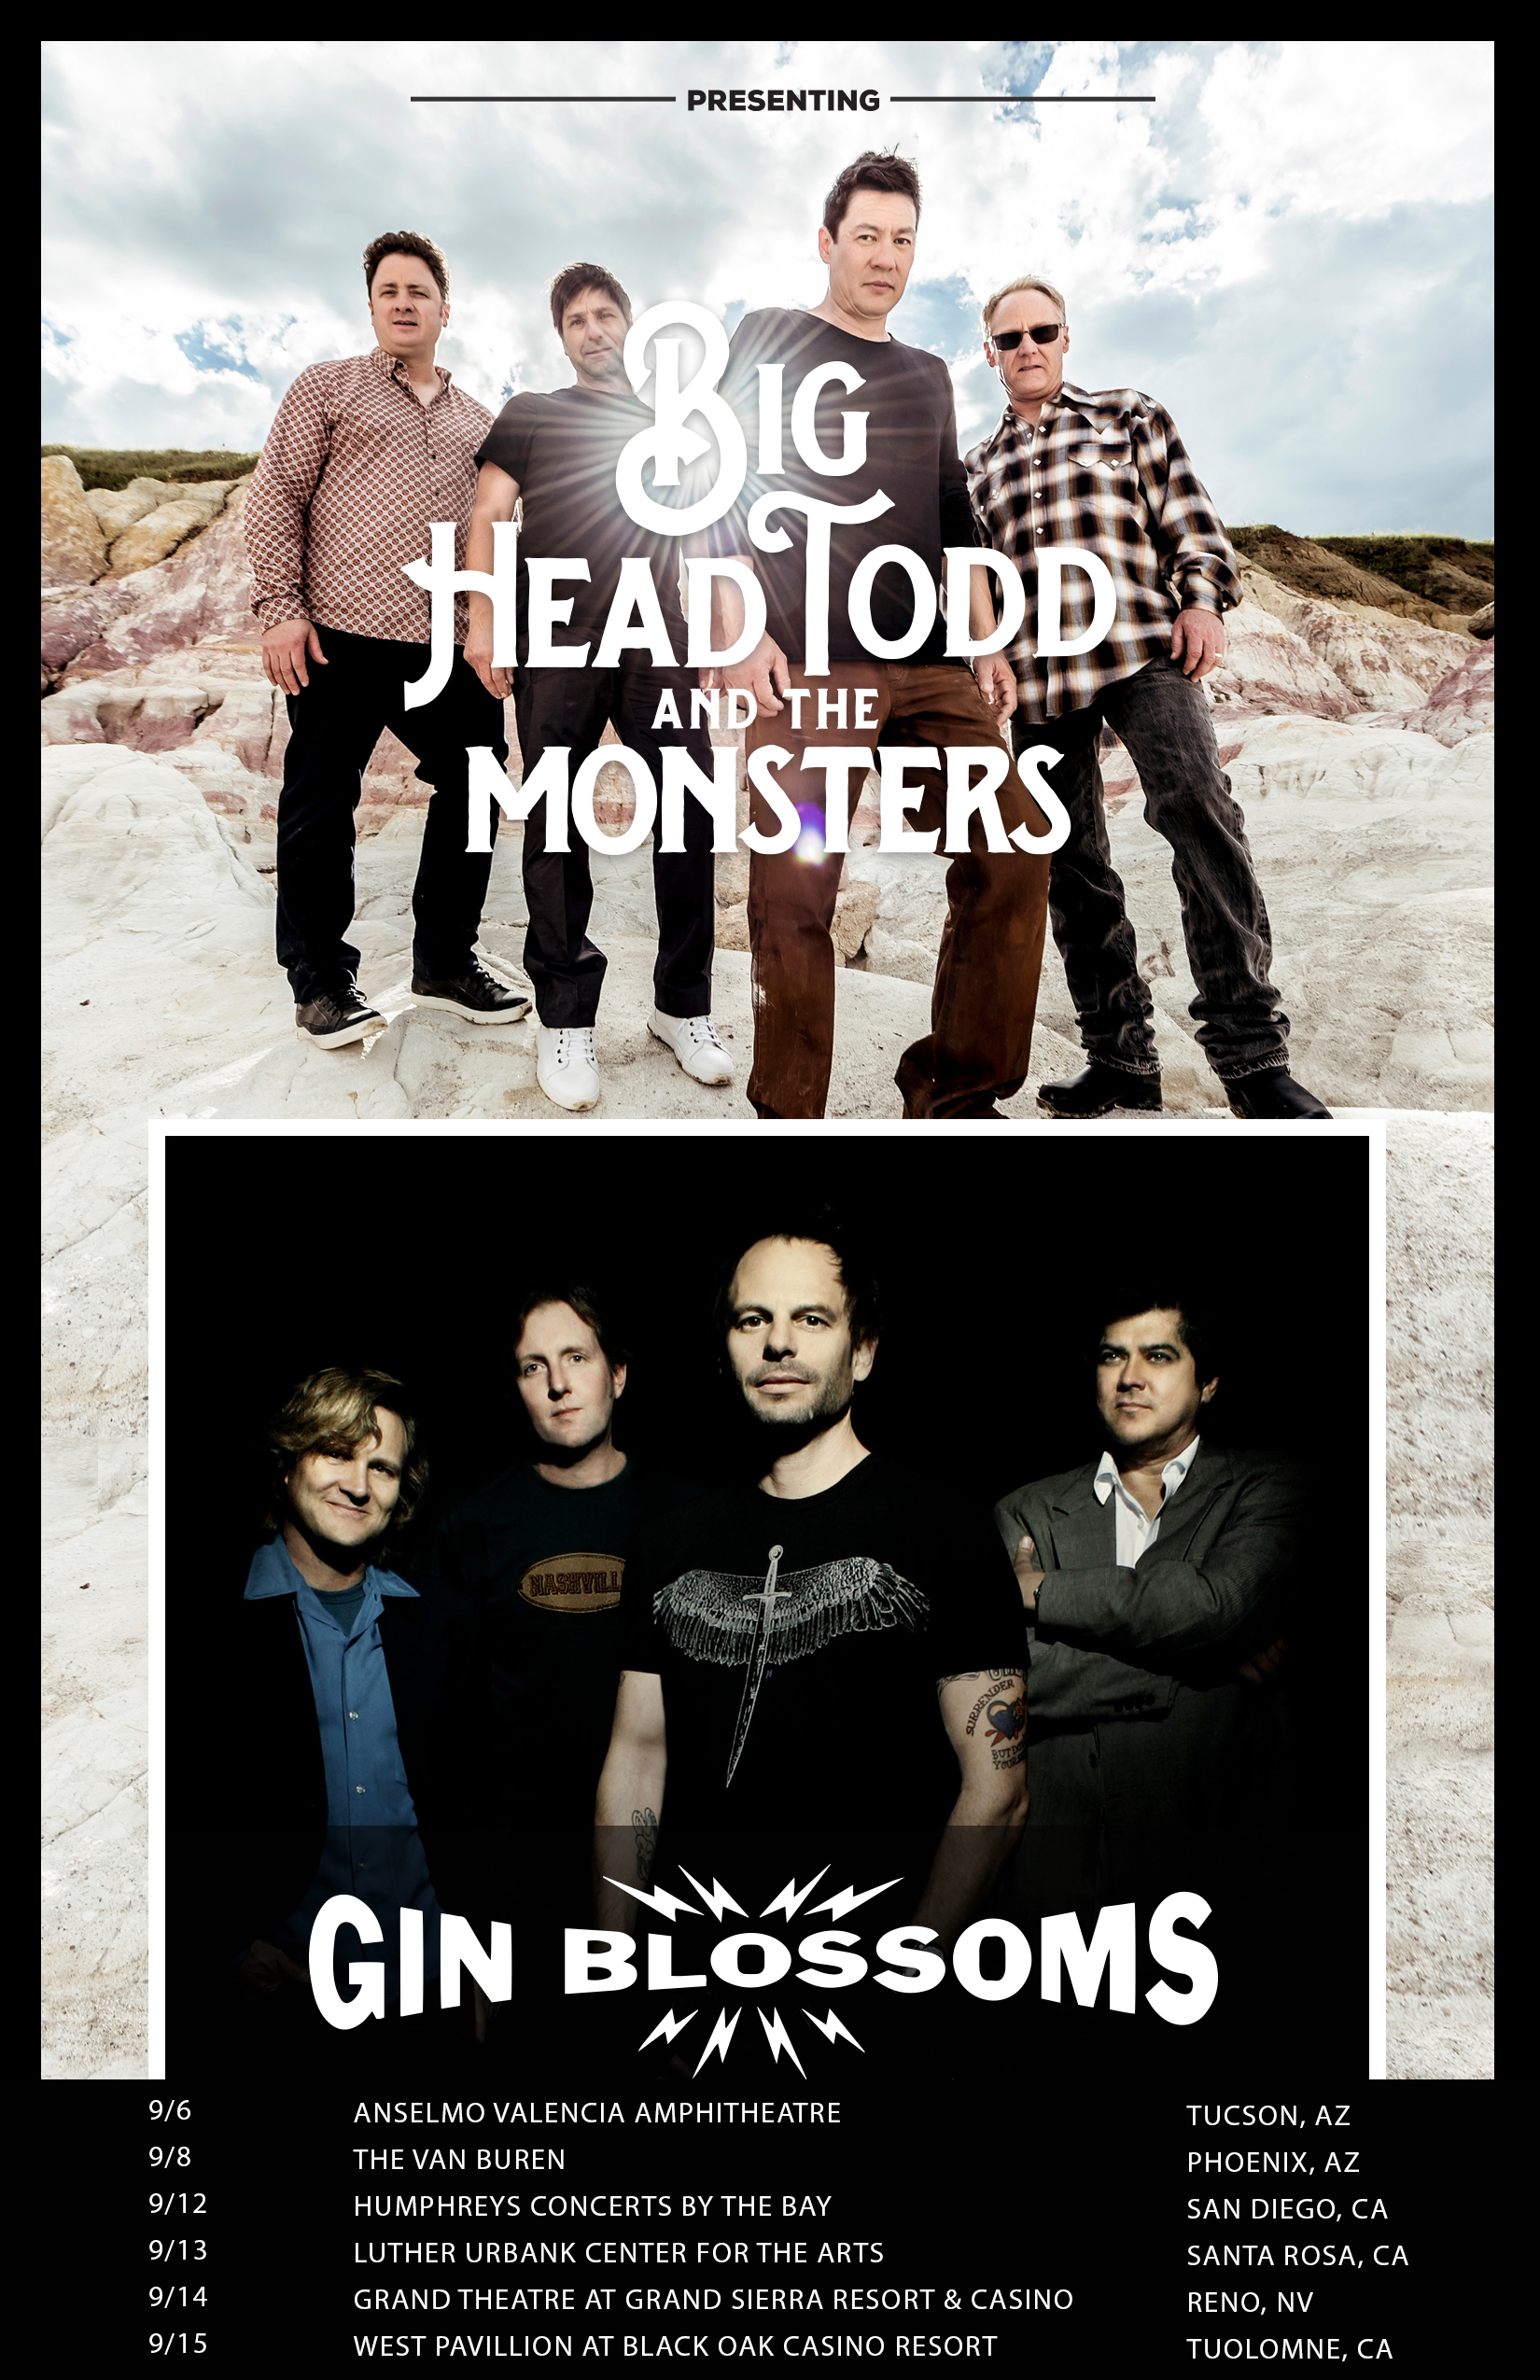 Big Head Todd and the Gin Blossoms headed to Tucson, AZ on 9/6 at AVA Amphitheatre! 